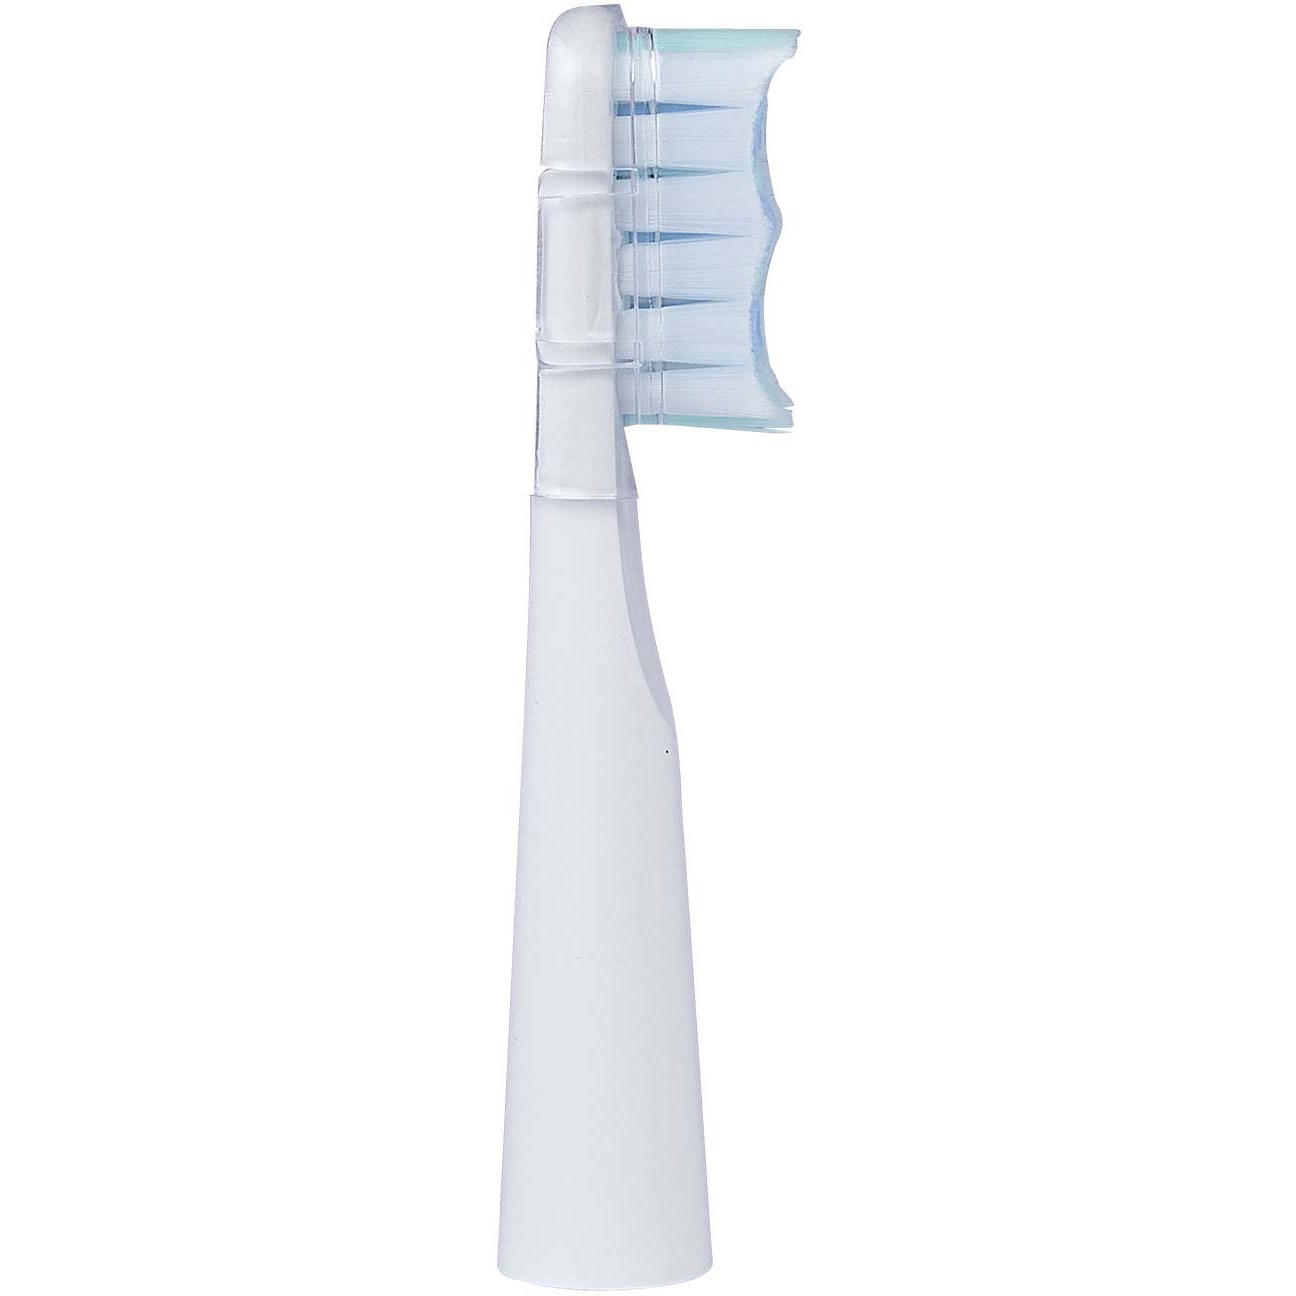 Läs mer om Kent Brushes Kent Oral Care SONIK Electric Toothbrush Replacement Head